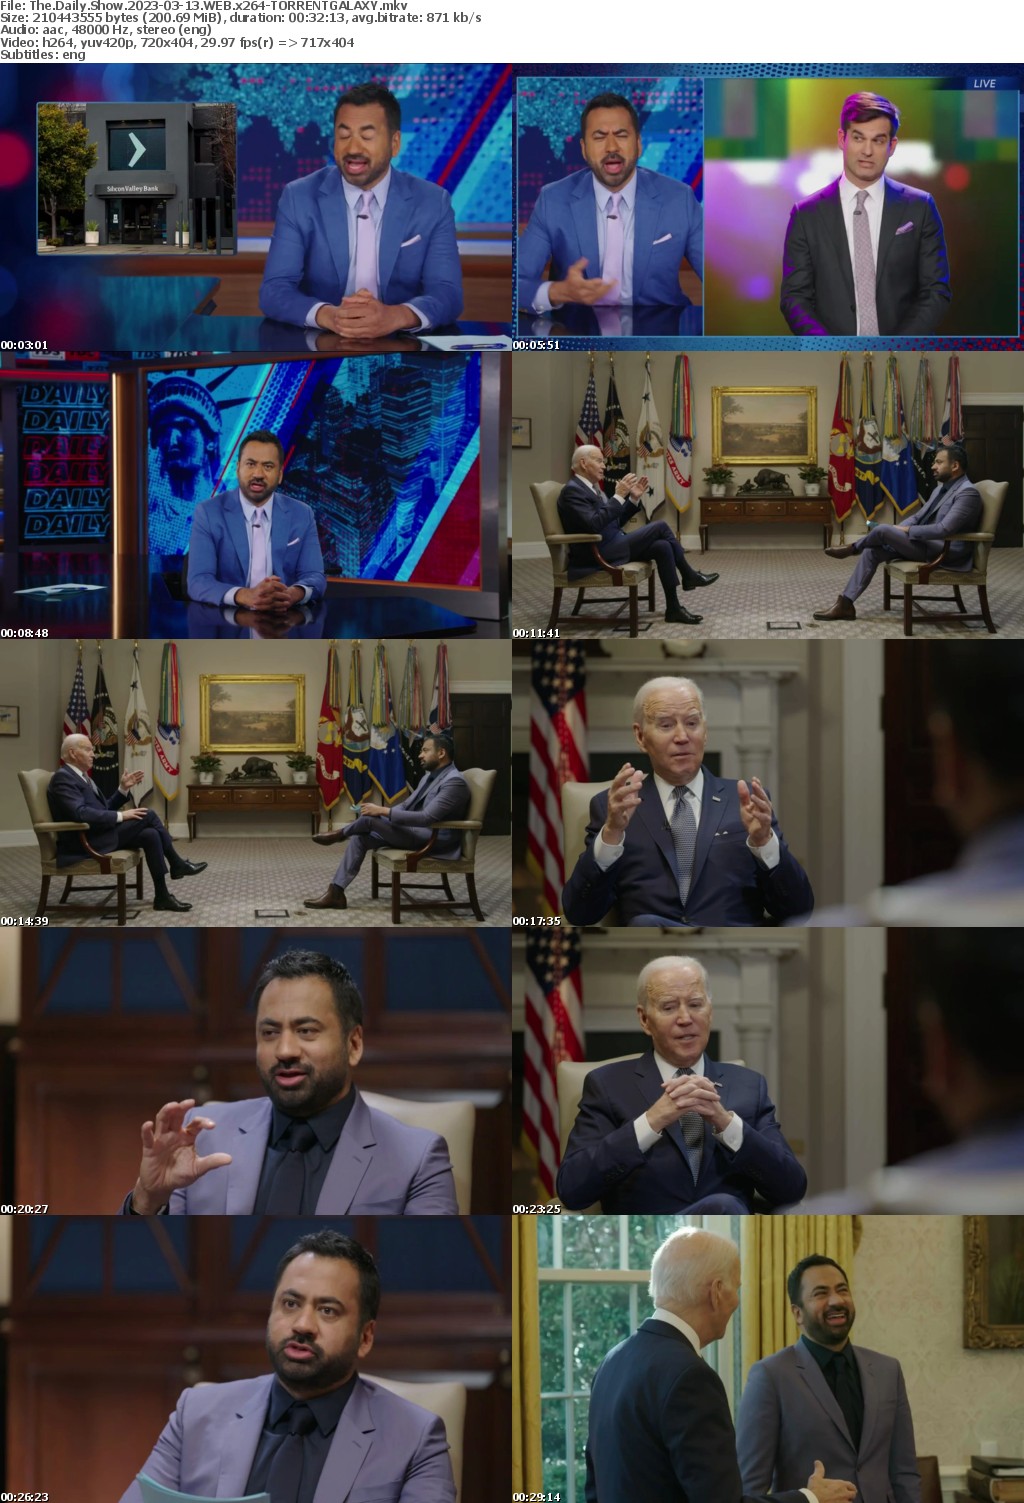 The Daily Show 2023-03-13 WEB x264-GALAXY